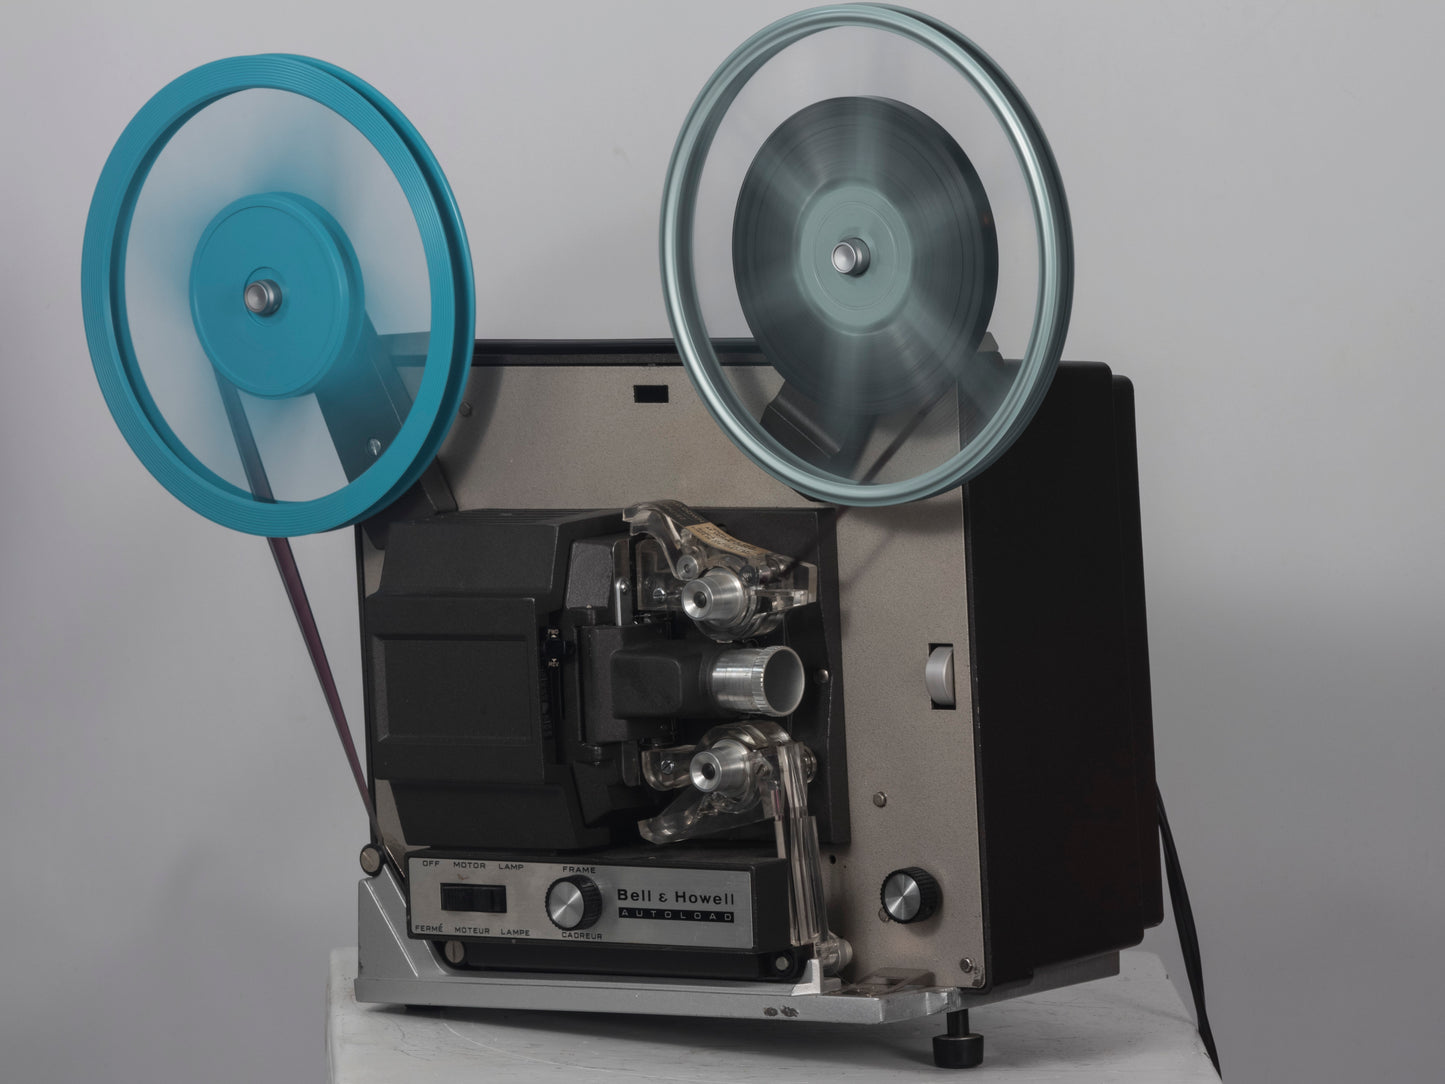 Bell and Howell Autoload 357 Super 8 movie projector. Shown operating.